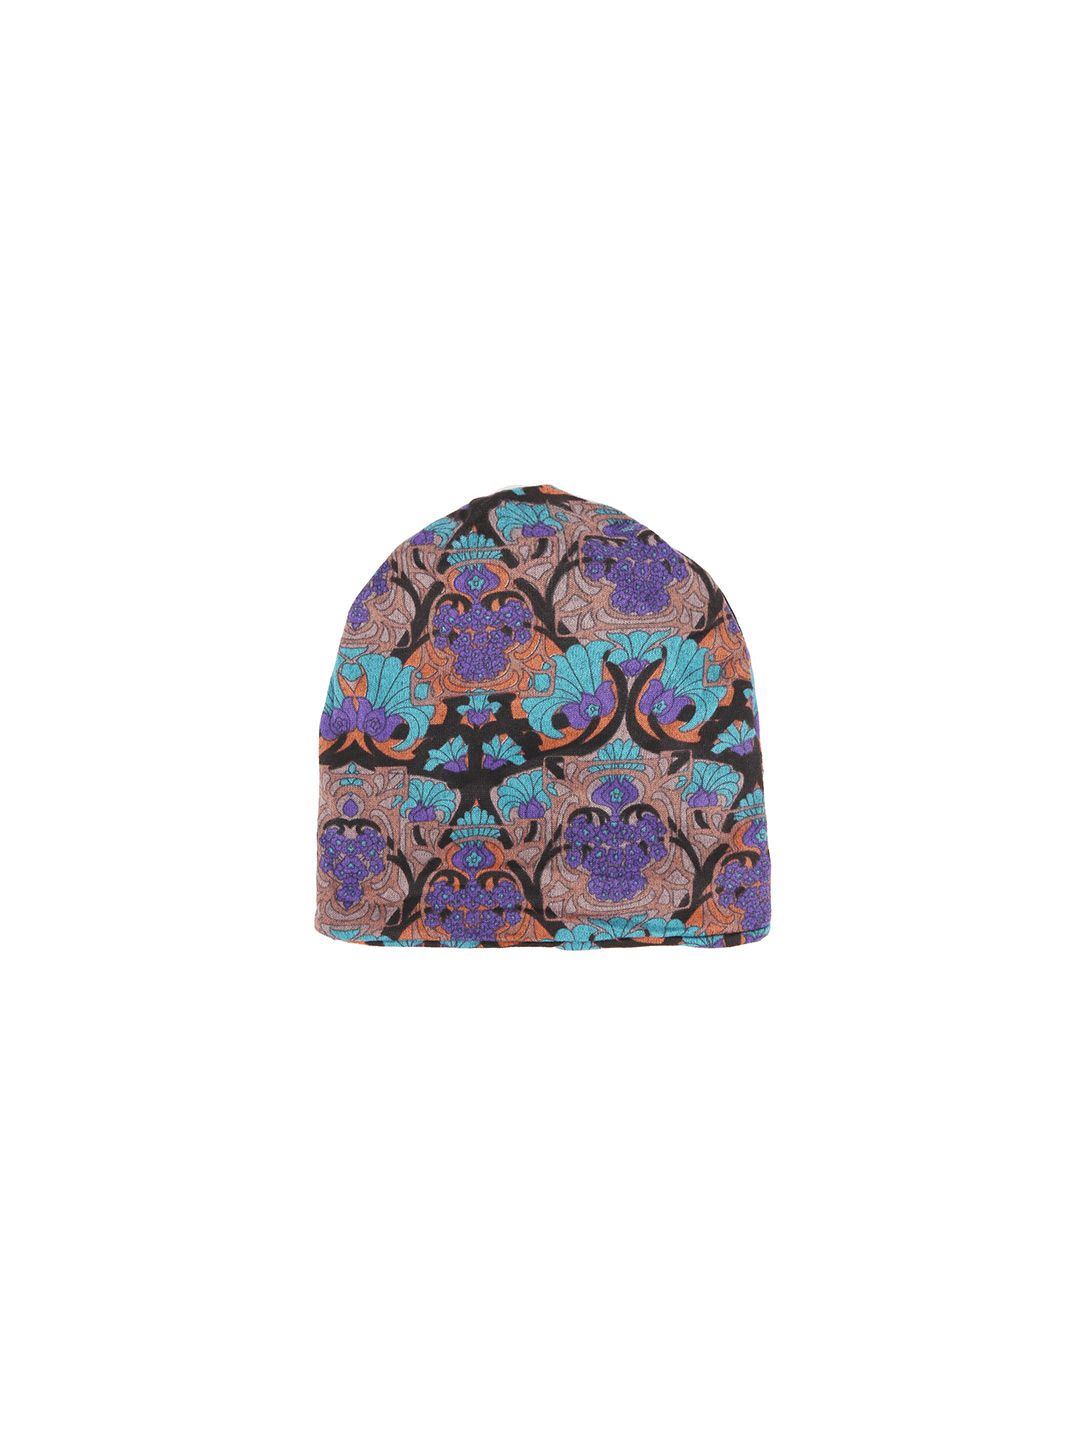 iSWEVEN Multicoloured Printed Cotton Beanie Cap Price in India